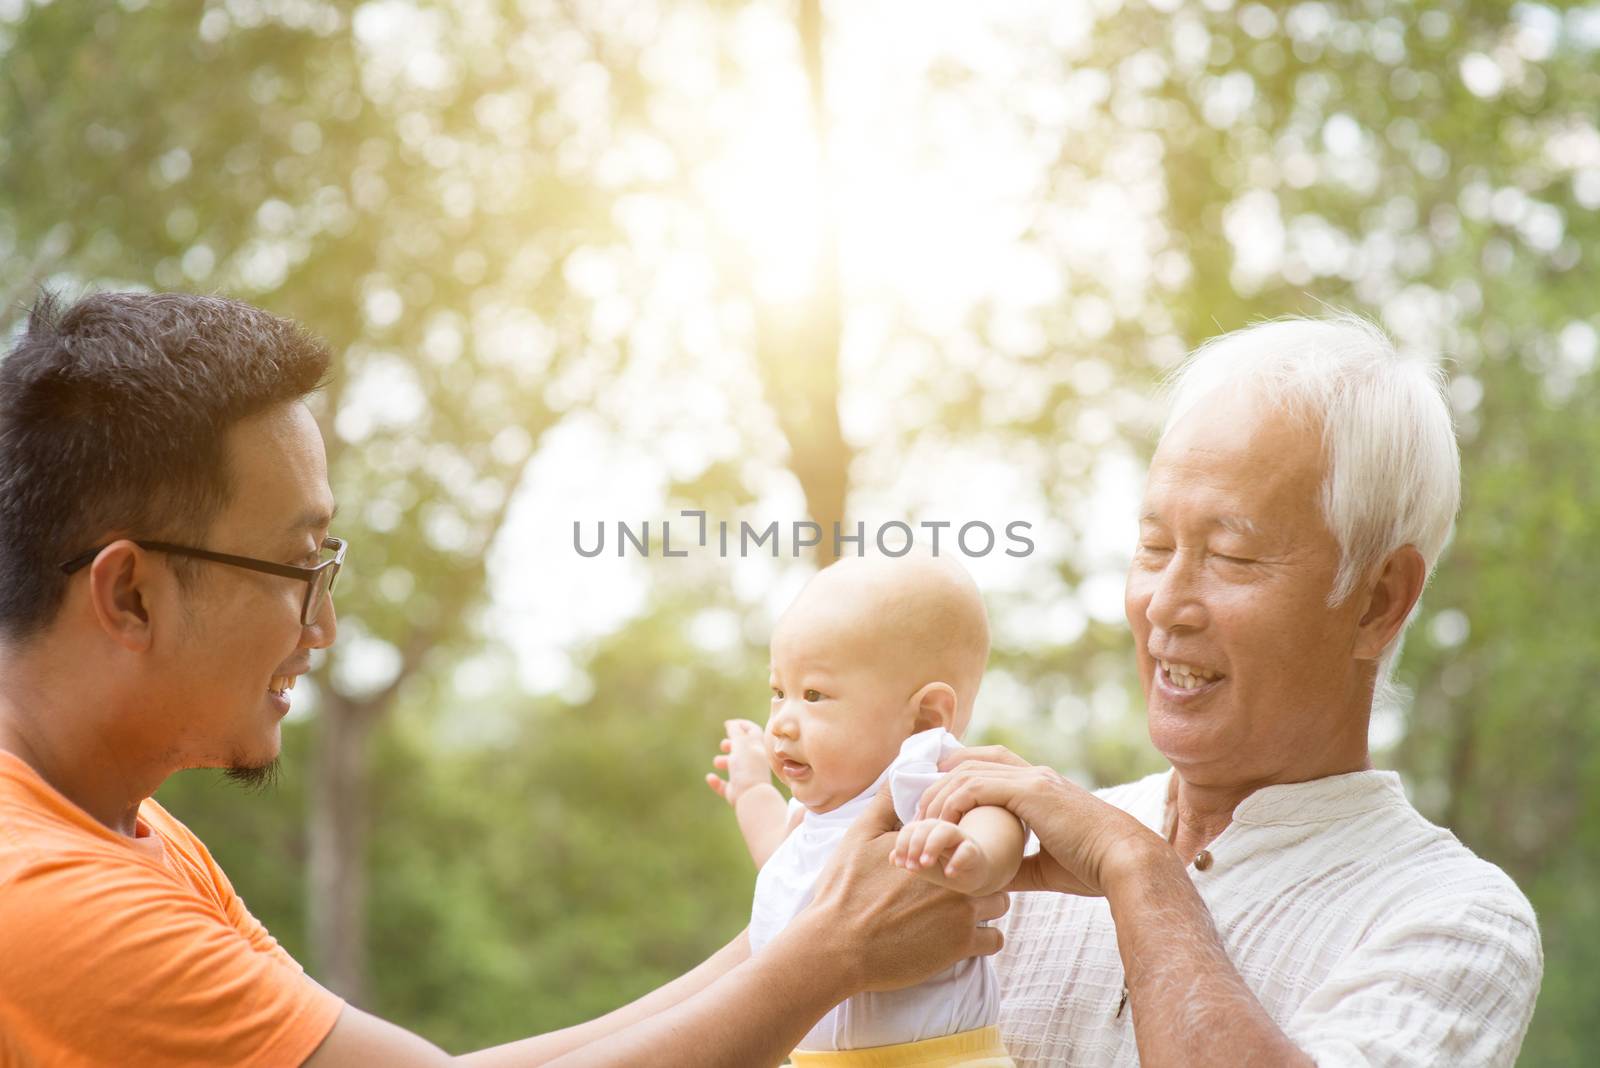 Multi generations family, baby grandchild, father and grandfather having fun outdoors. Life insurance concept.